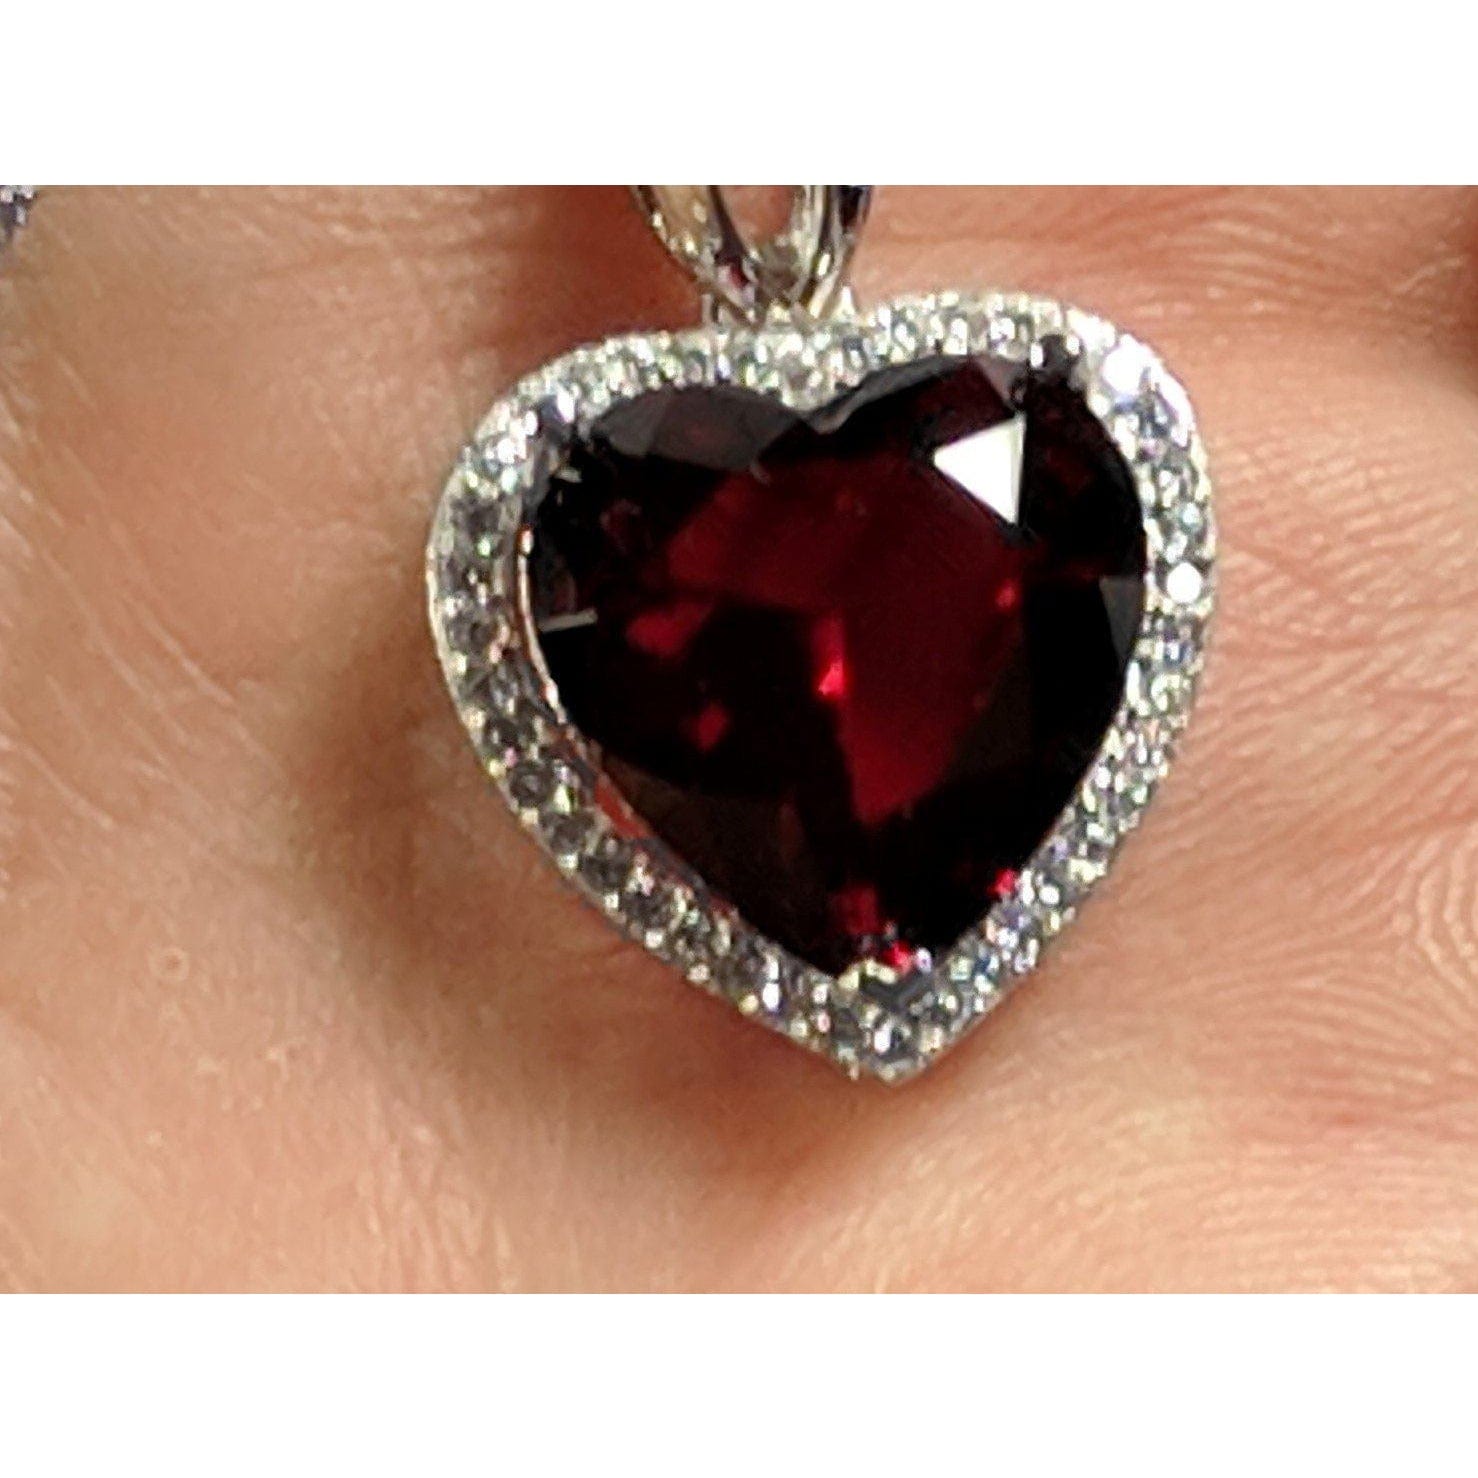 Heart Pendant in 925 Silver, Simulated Ruby, Topaz or Amethyst Crystal with CZ - The Pink Pigs, A Compassionate Boutique